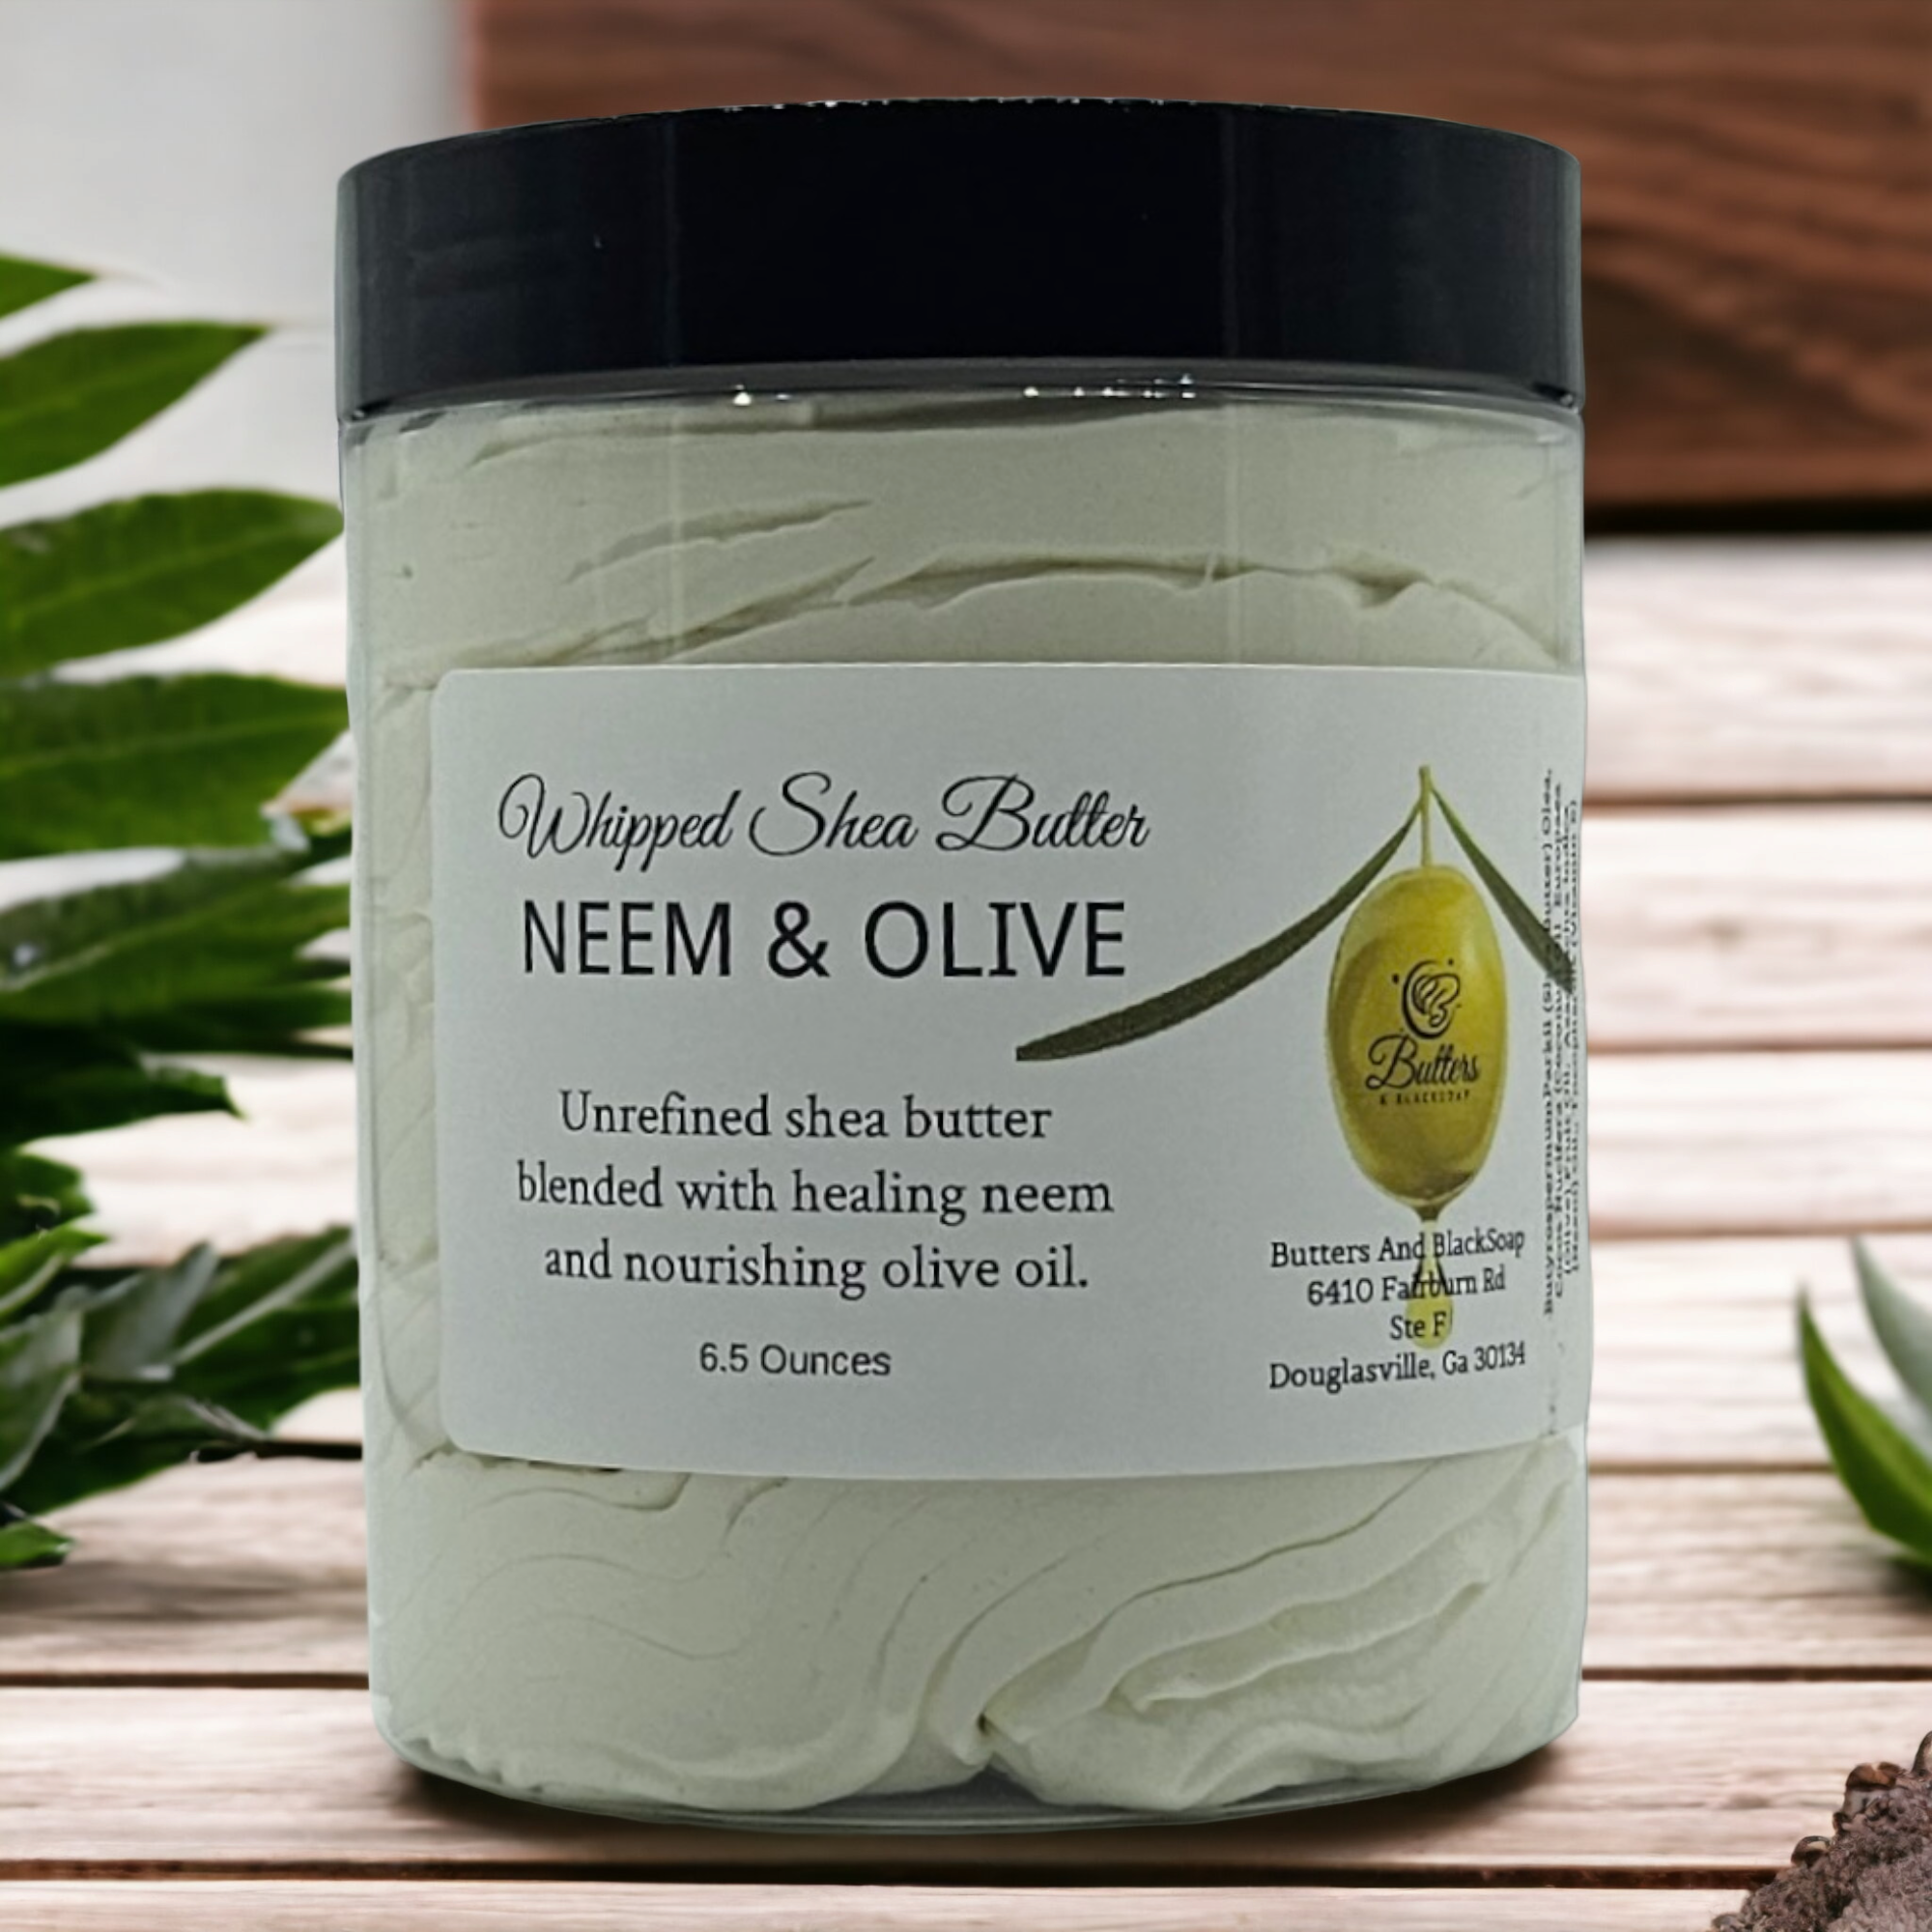 Neem & Olive Whipped Shea Butter